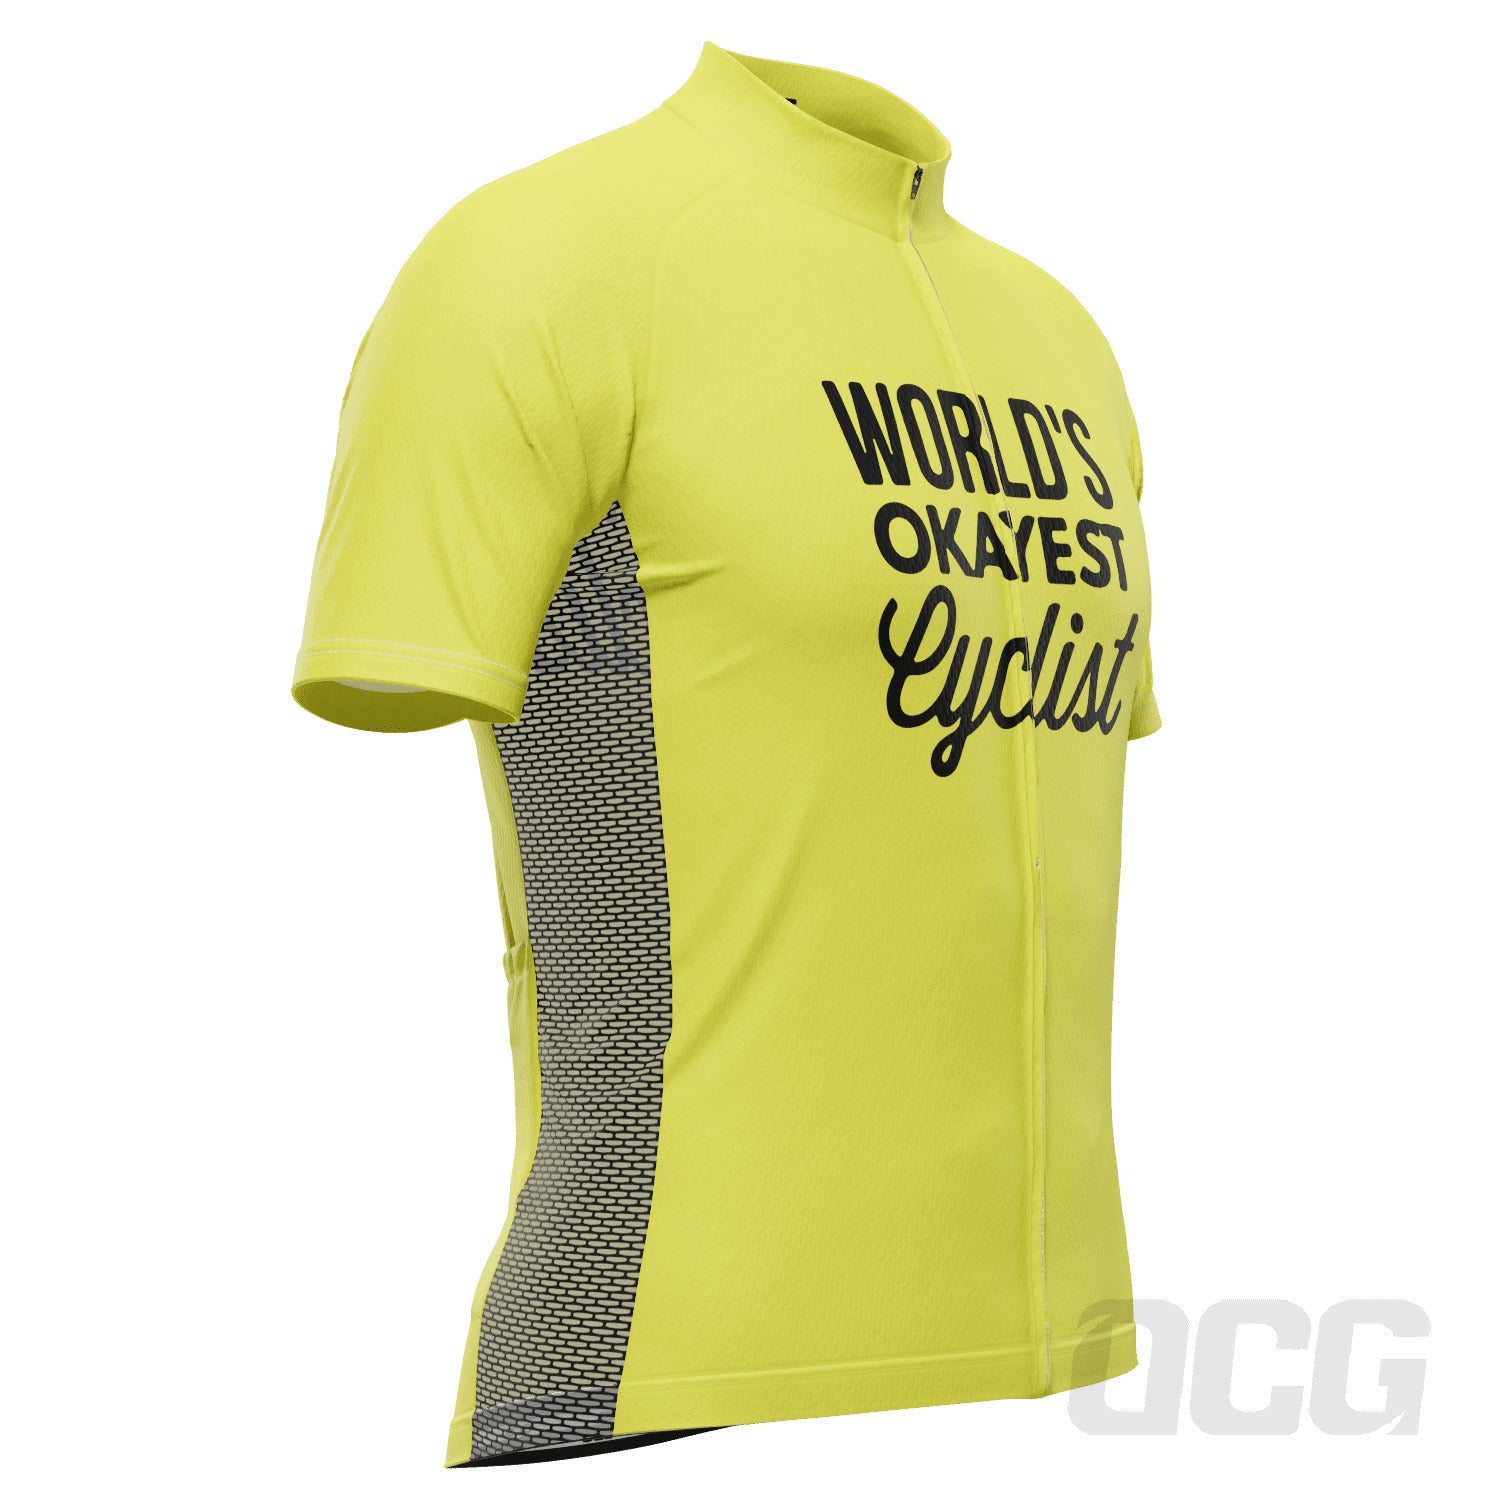 Men's World's Okayest Cyclist Short Sleeve Cycling Jersey